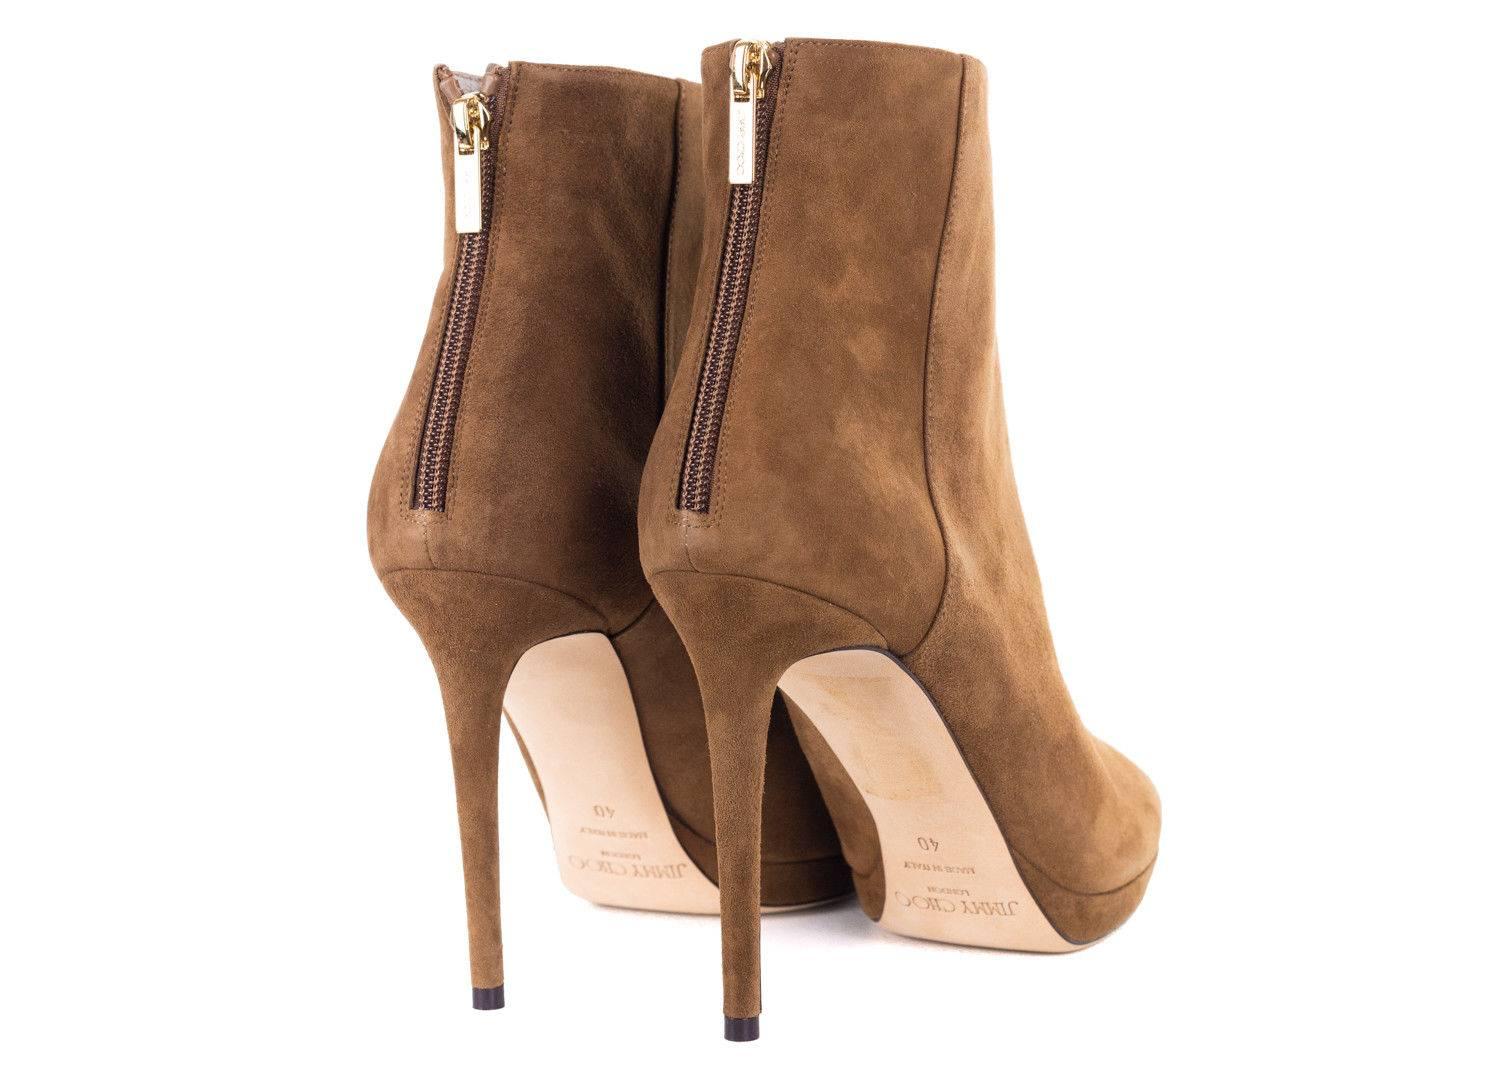 Jimmy Choos Harvey 100 ankle boots are made in Italy from supple suede for a look that is as timeless as it is alluring. The slender heel and uninterrupted silhouette offer clean cut appeal while the suede brown hue keeps the look classic and sharp.